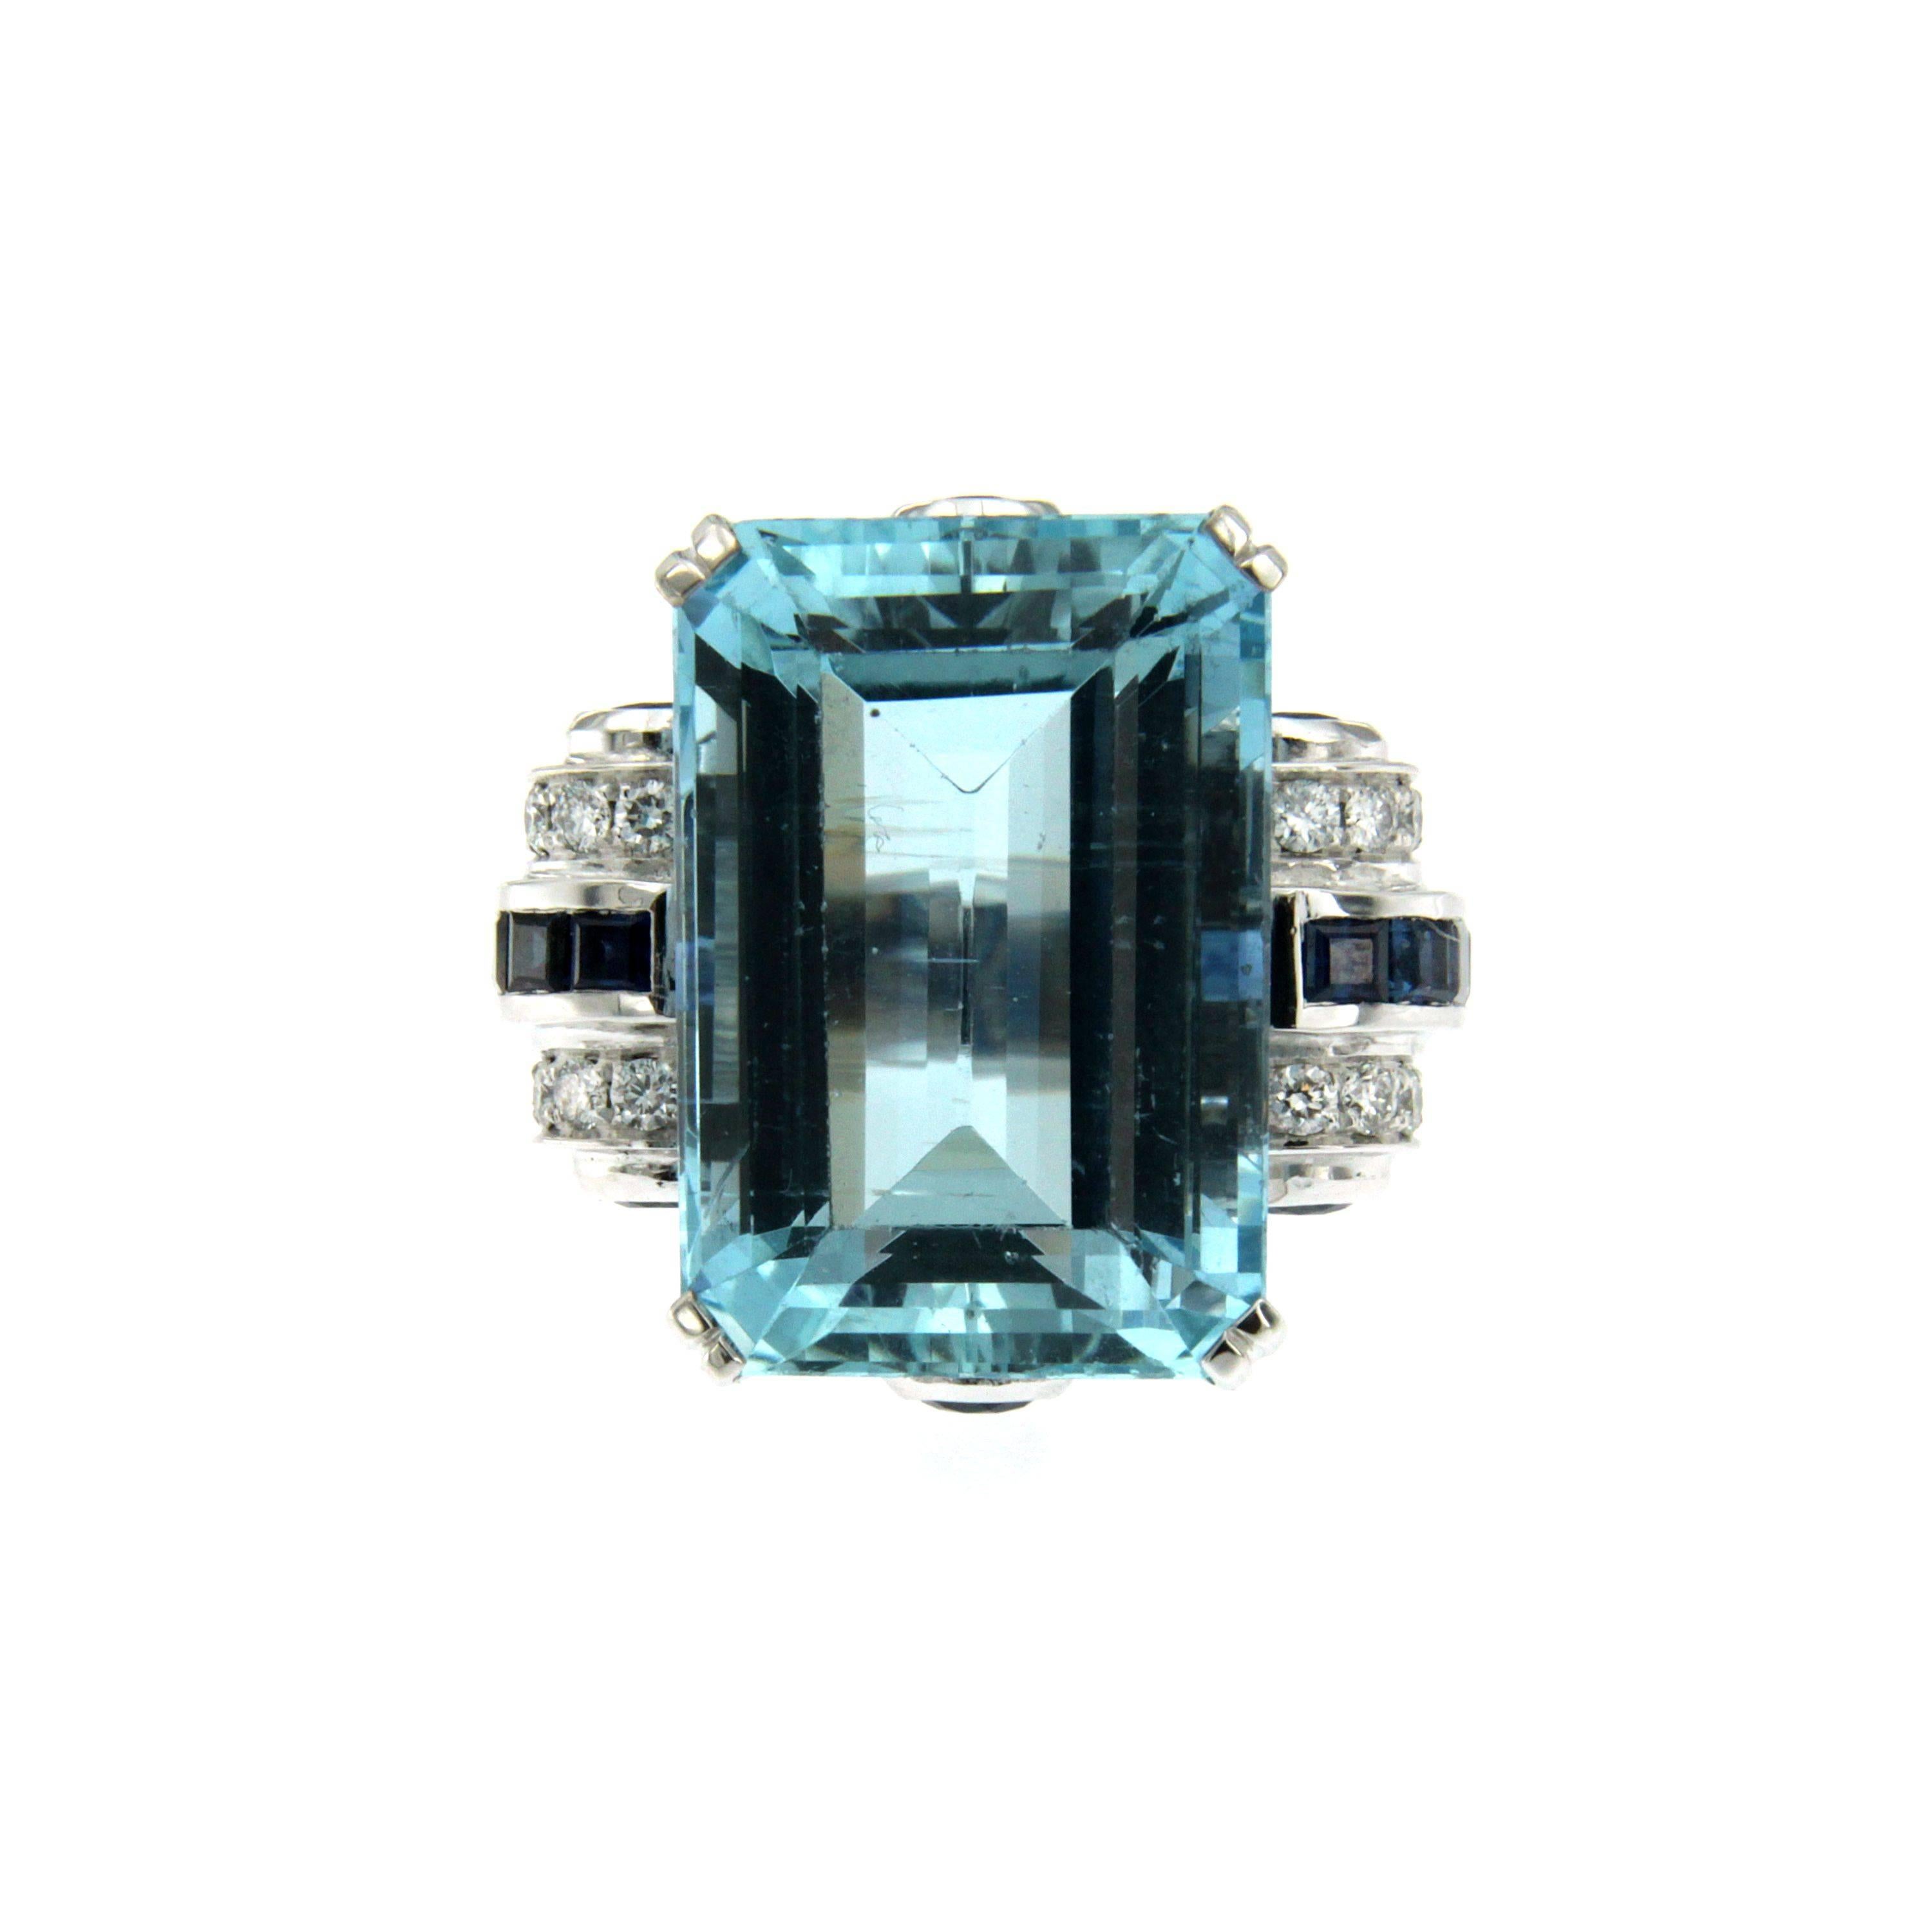 Sensational Aquamarine Ring mounted in 18k white gold set with a rare natural Aquamarine of 26.45 carat 22.09 x 15.26 mm and  surrounded by approx. 1.90 carat of fine square cut sapphires, 2.20 cts of round cut sapphires and 0,40 ct round brilliant